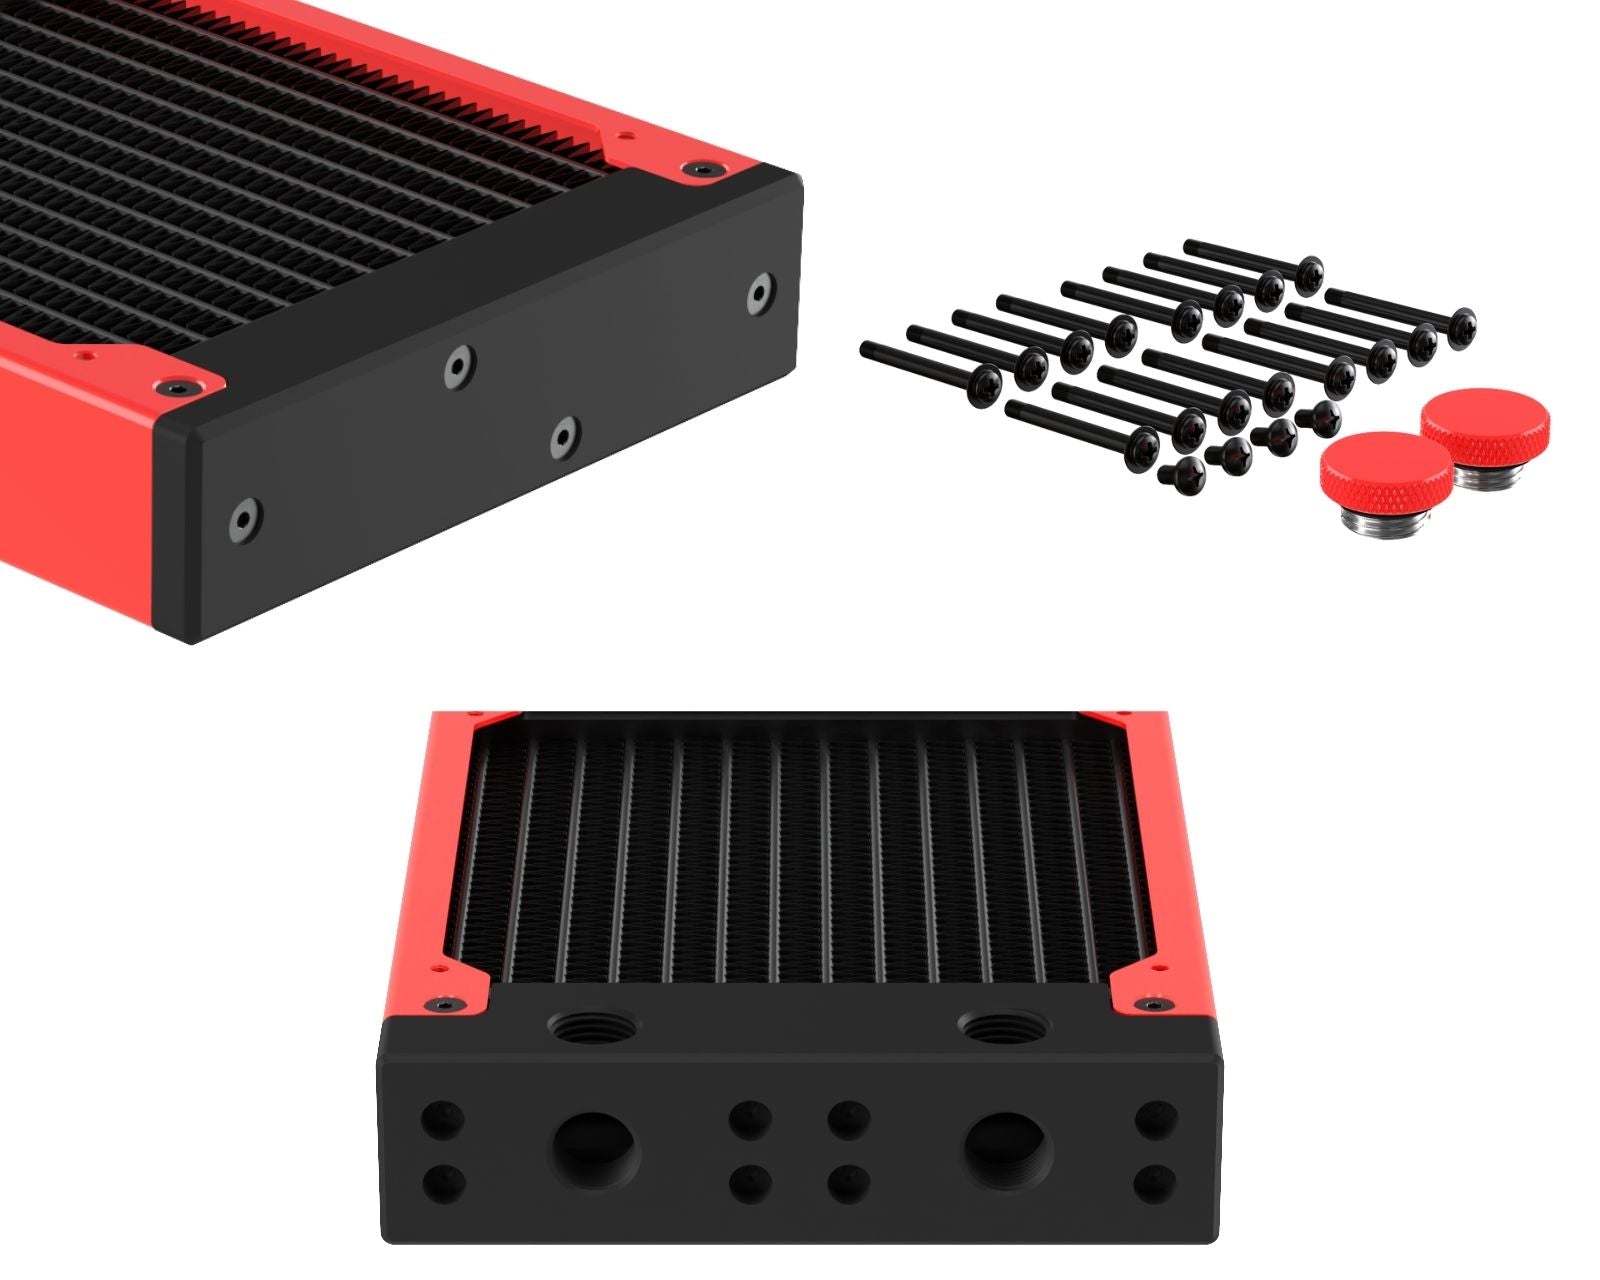 PrimoChill 480SL (30mm) EXIMO Modular Radiator, Black POM, 4x120mm, Quad Fan (R-SL-BK48) Available in 20+ Colors, Assembled in USA and Custom Watercooling Loop Ready - UV Red